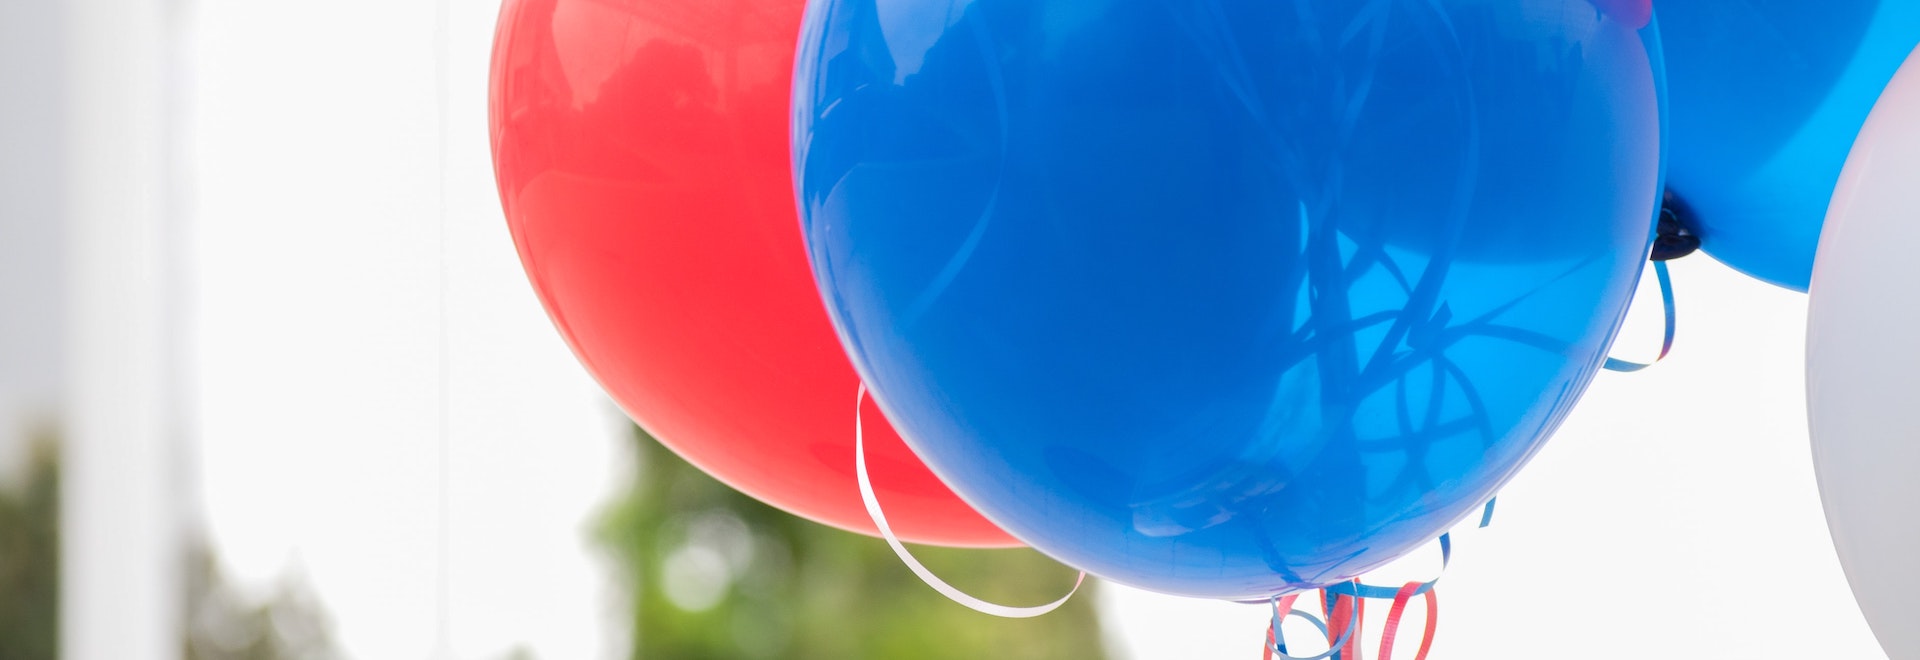 Red white and blue balloons